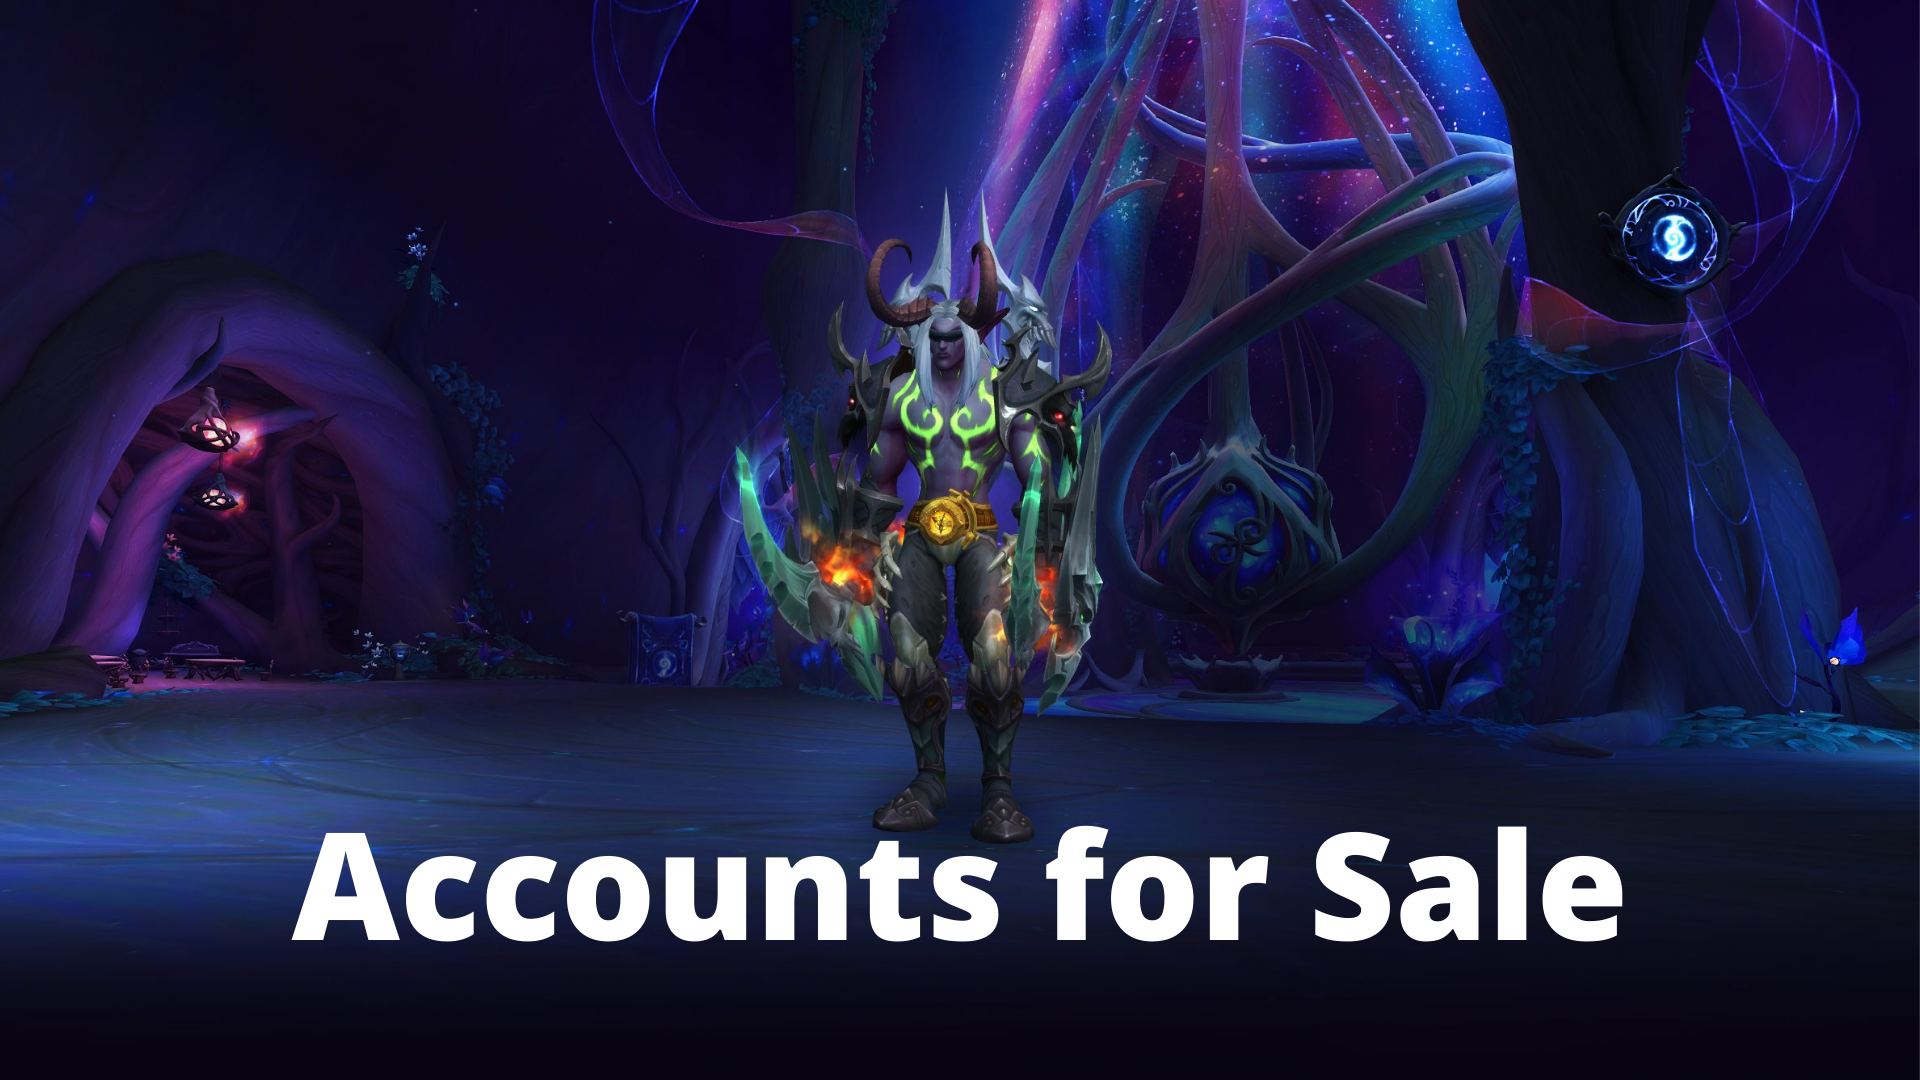 World of Warcraft Accounts for Sale | Buy Wow Account Fast and Secure via Paypal